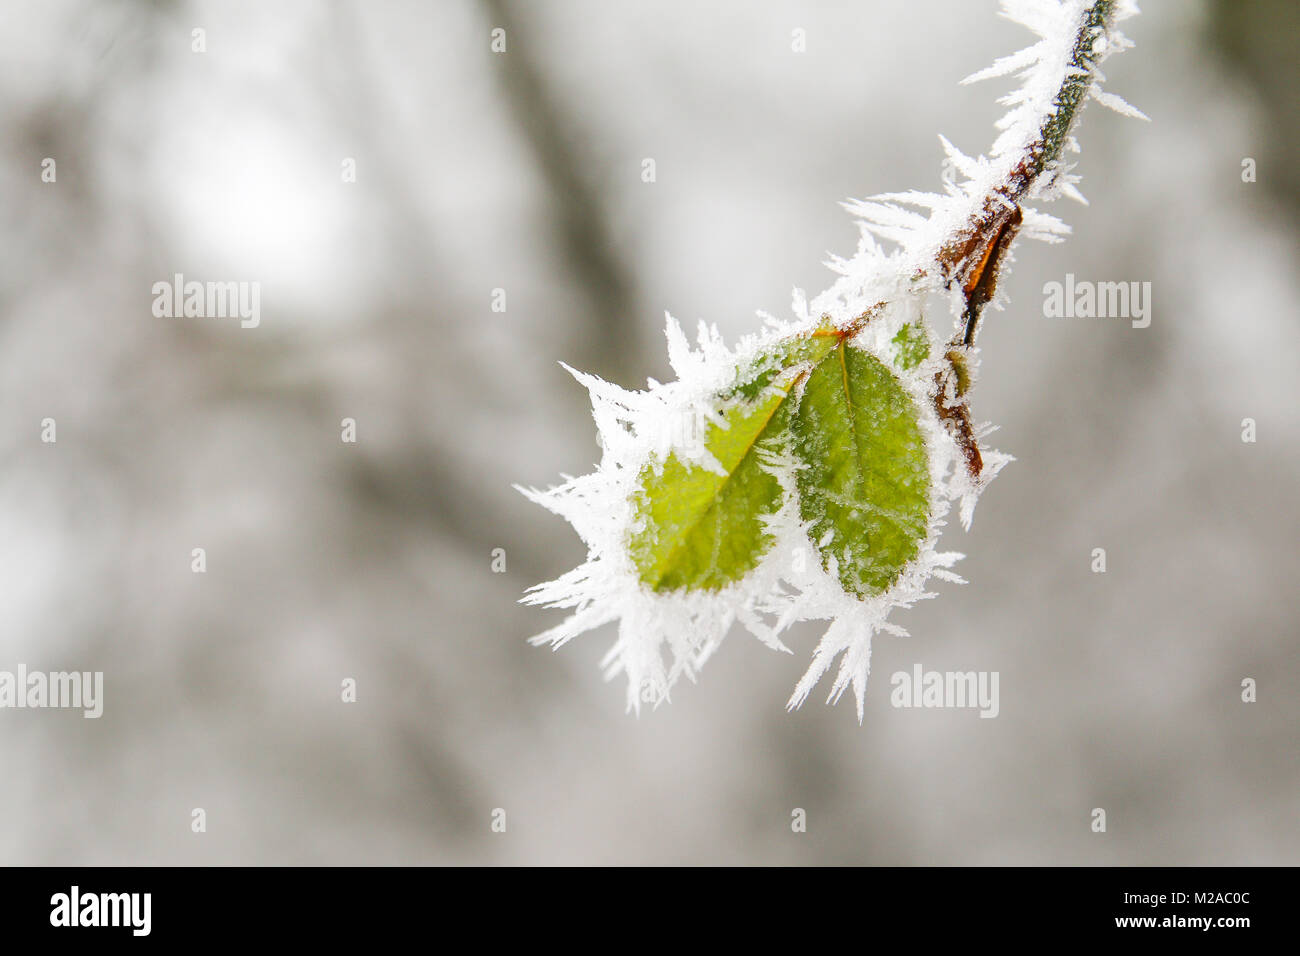 A detail picture of the frozen branch with a fresh leafs on it. Stock Photo